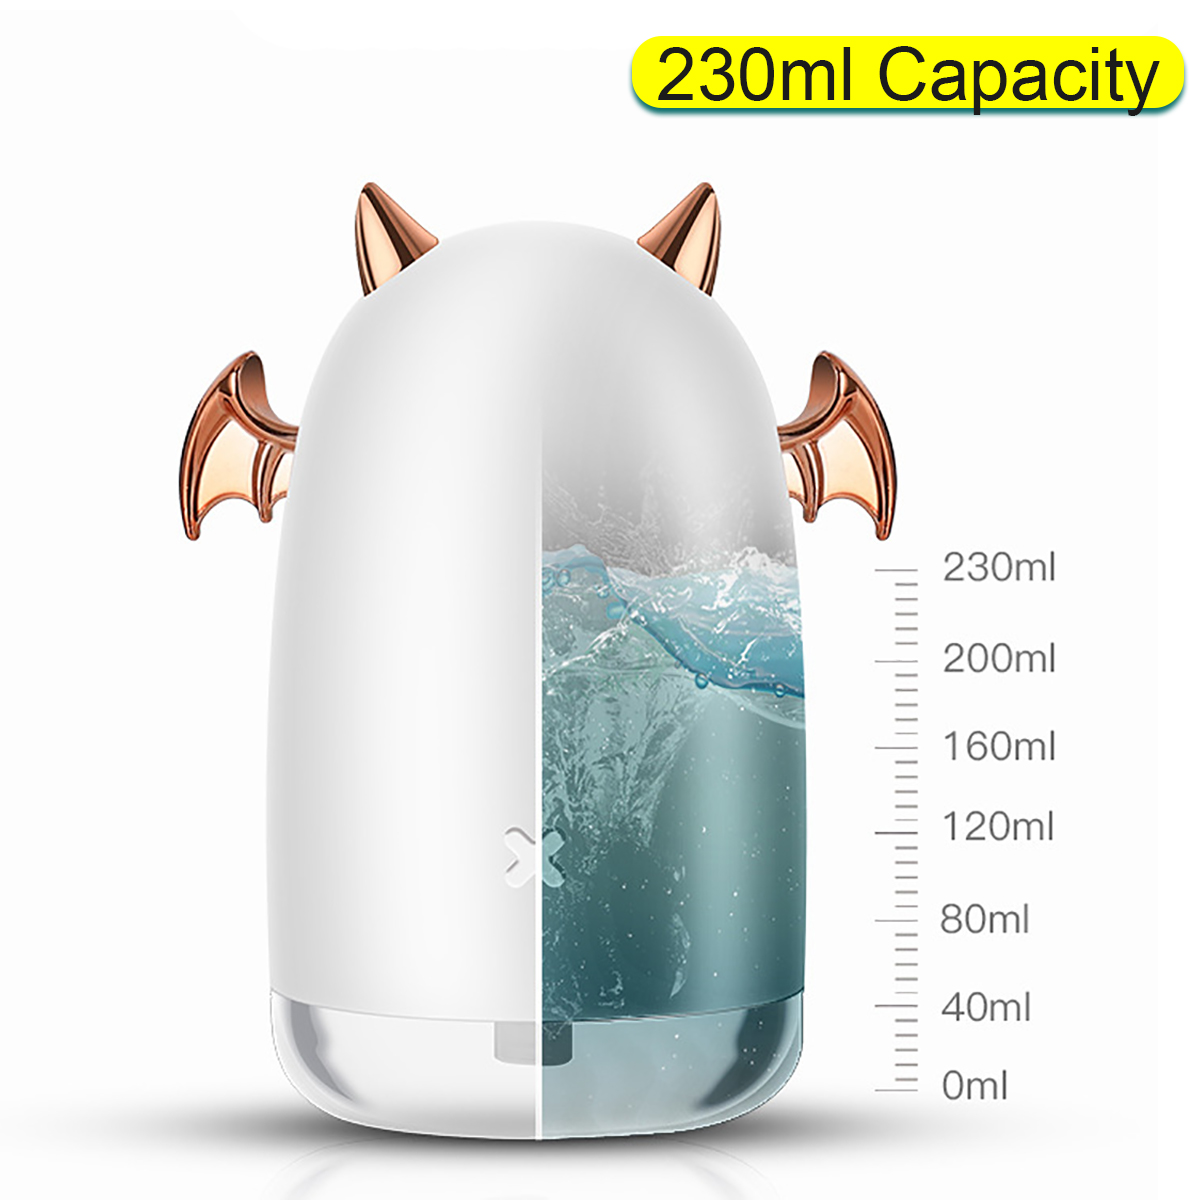 7-LED-Humidifier-USB-Purifier-Mist-Aroma-Essential-Oil-Diffuser-Halloween-Gift-1651094-8